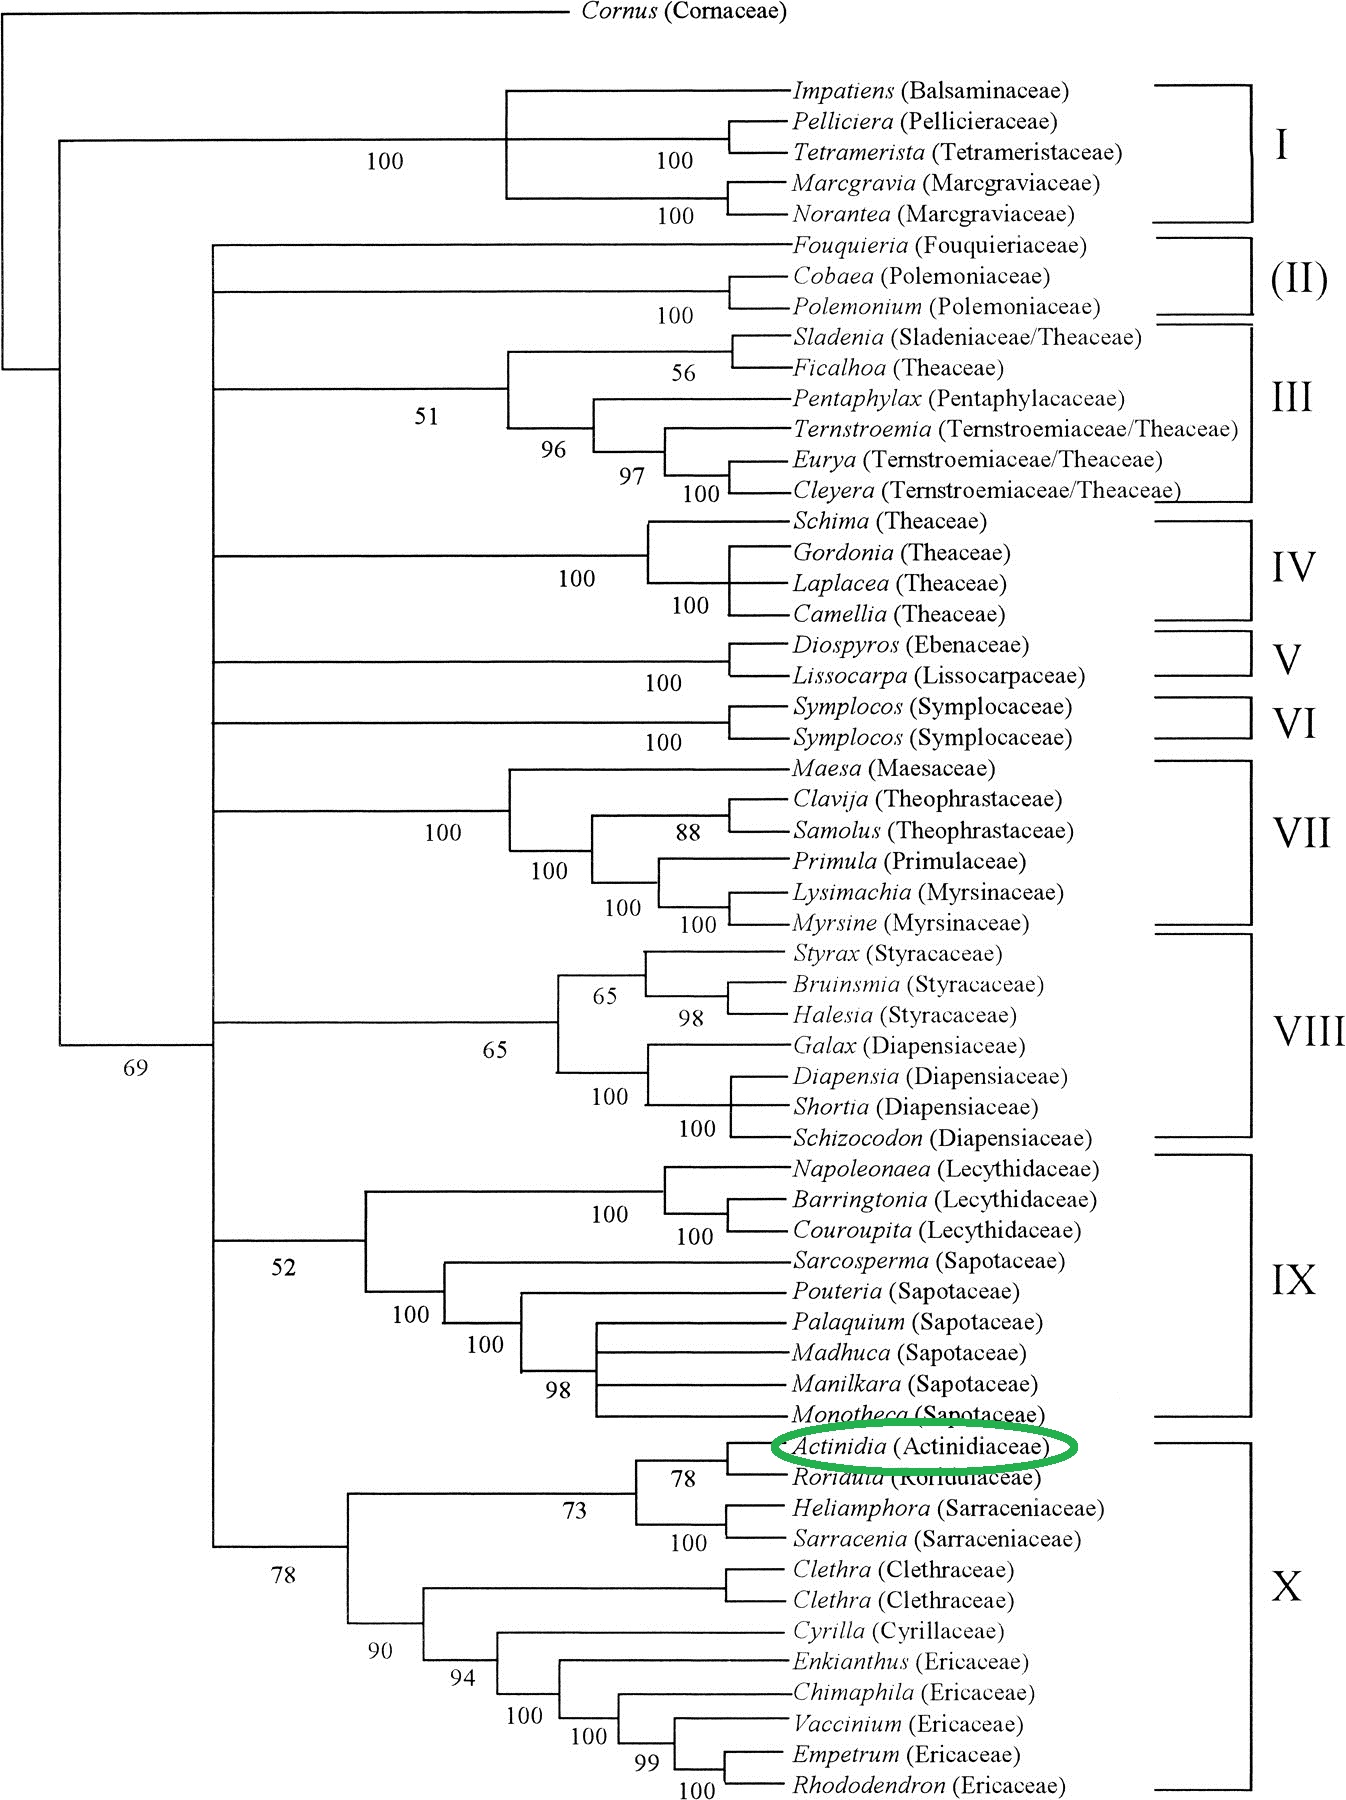 Phylogenetic Tree for Ericales - Tree provided in academic journal by Arne A. Anderberg, Catarina Rydin and Mari Kallersjo http://www.amjbot.org/content/89/4/677.full